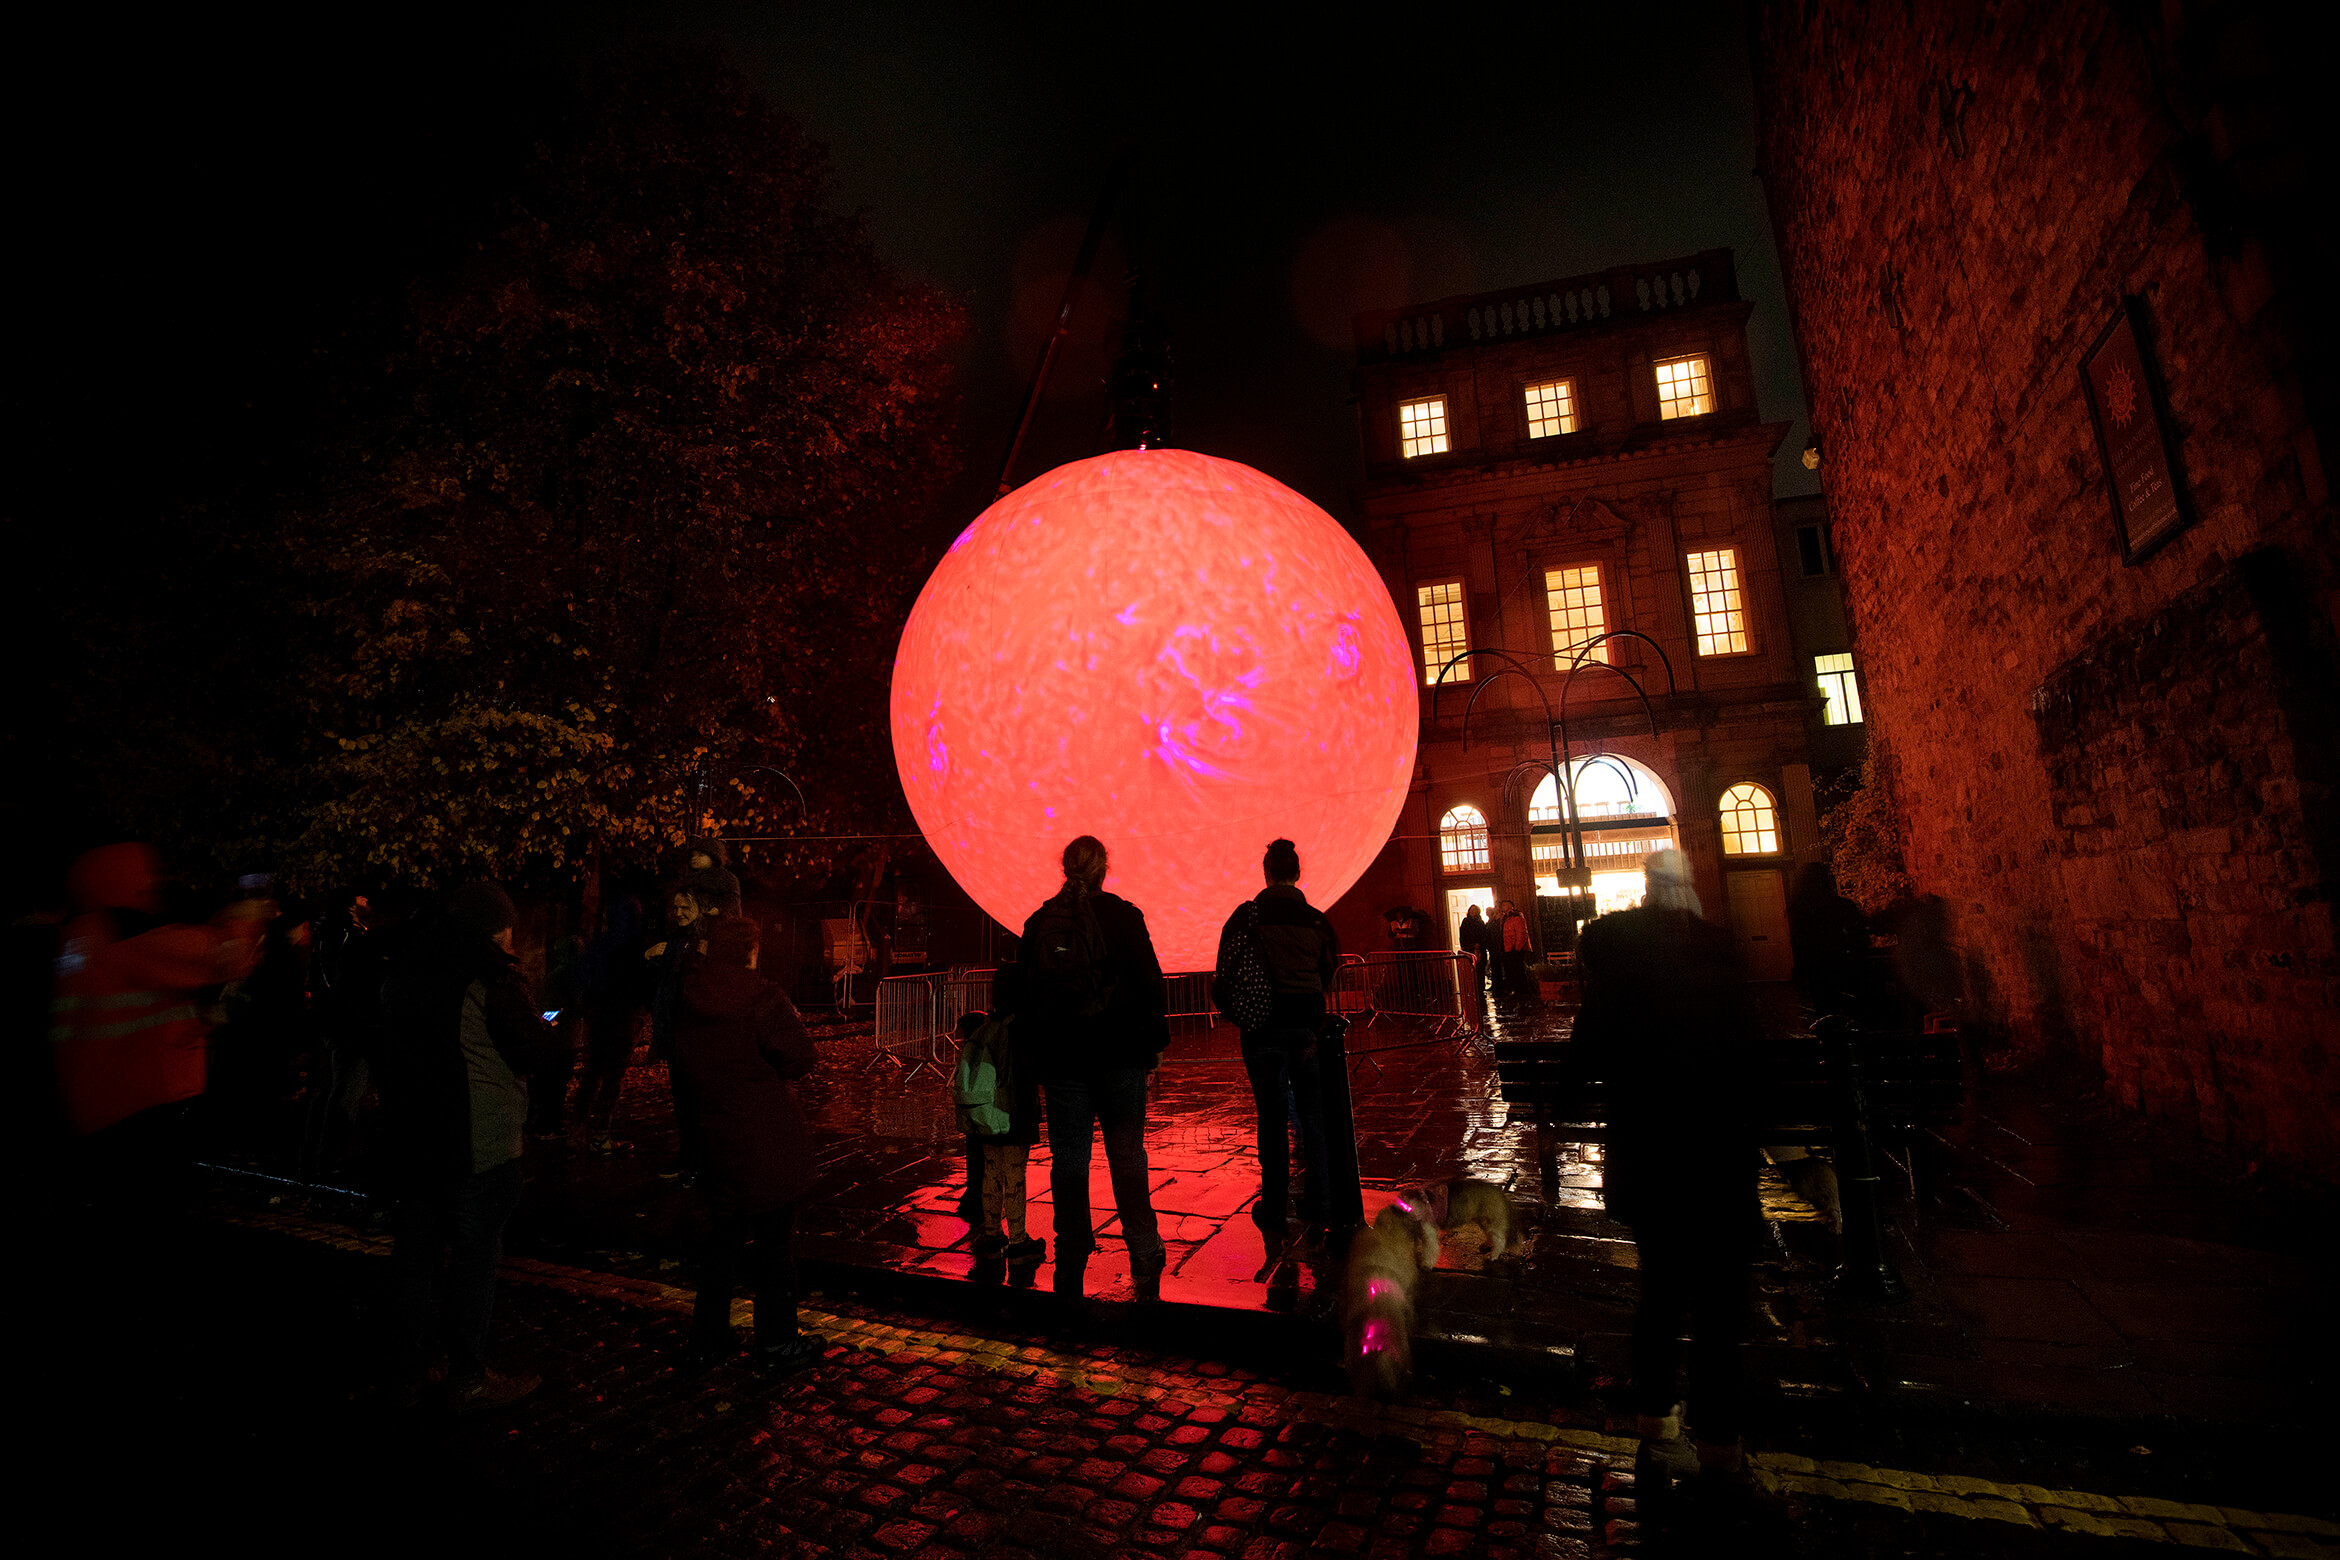 Photograph of SUN taken outside at night and showing in a group of people watching it during its red phase